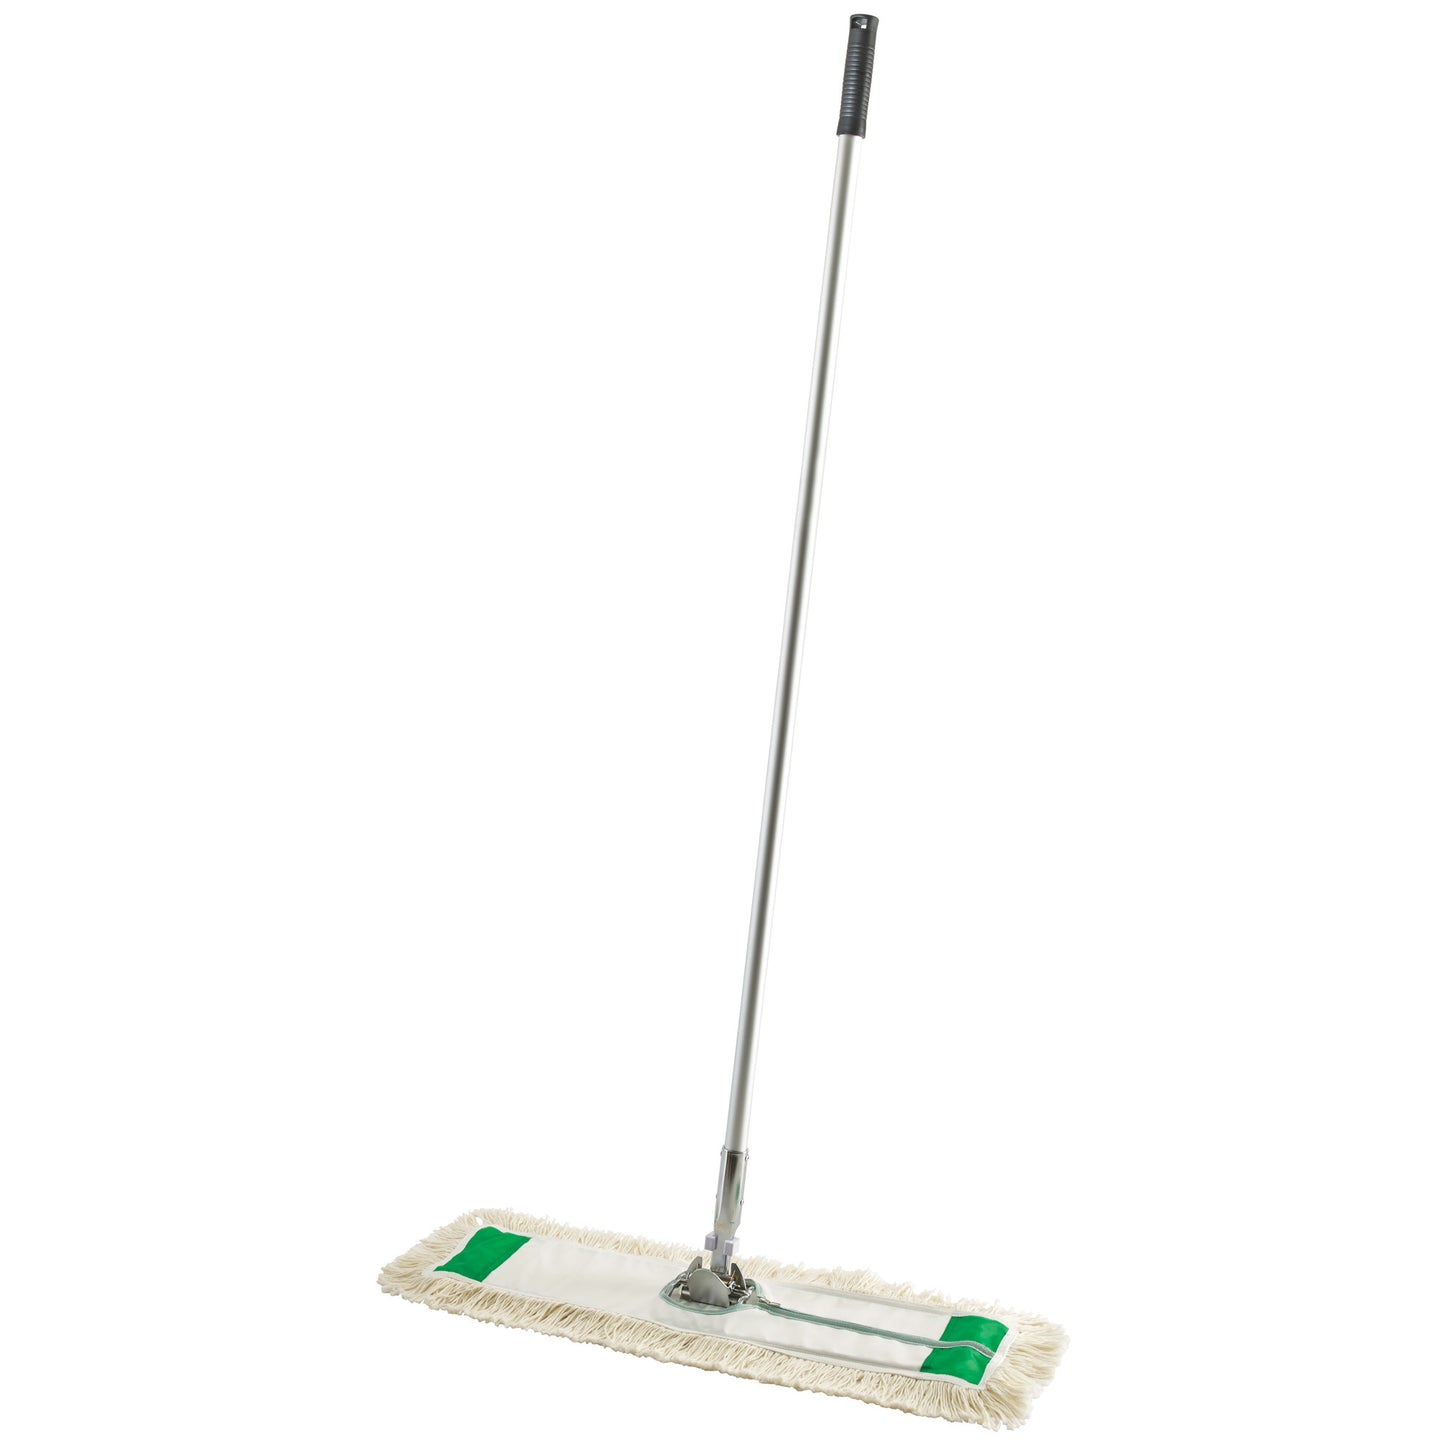 DM-24 - Dust Mop Sets: Mop Head with Frame & Handle